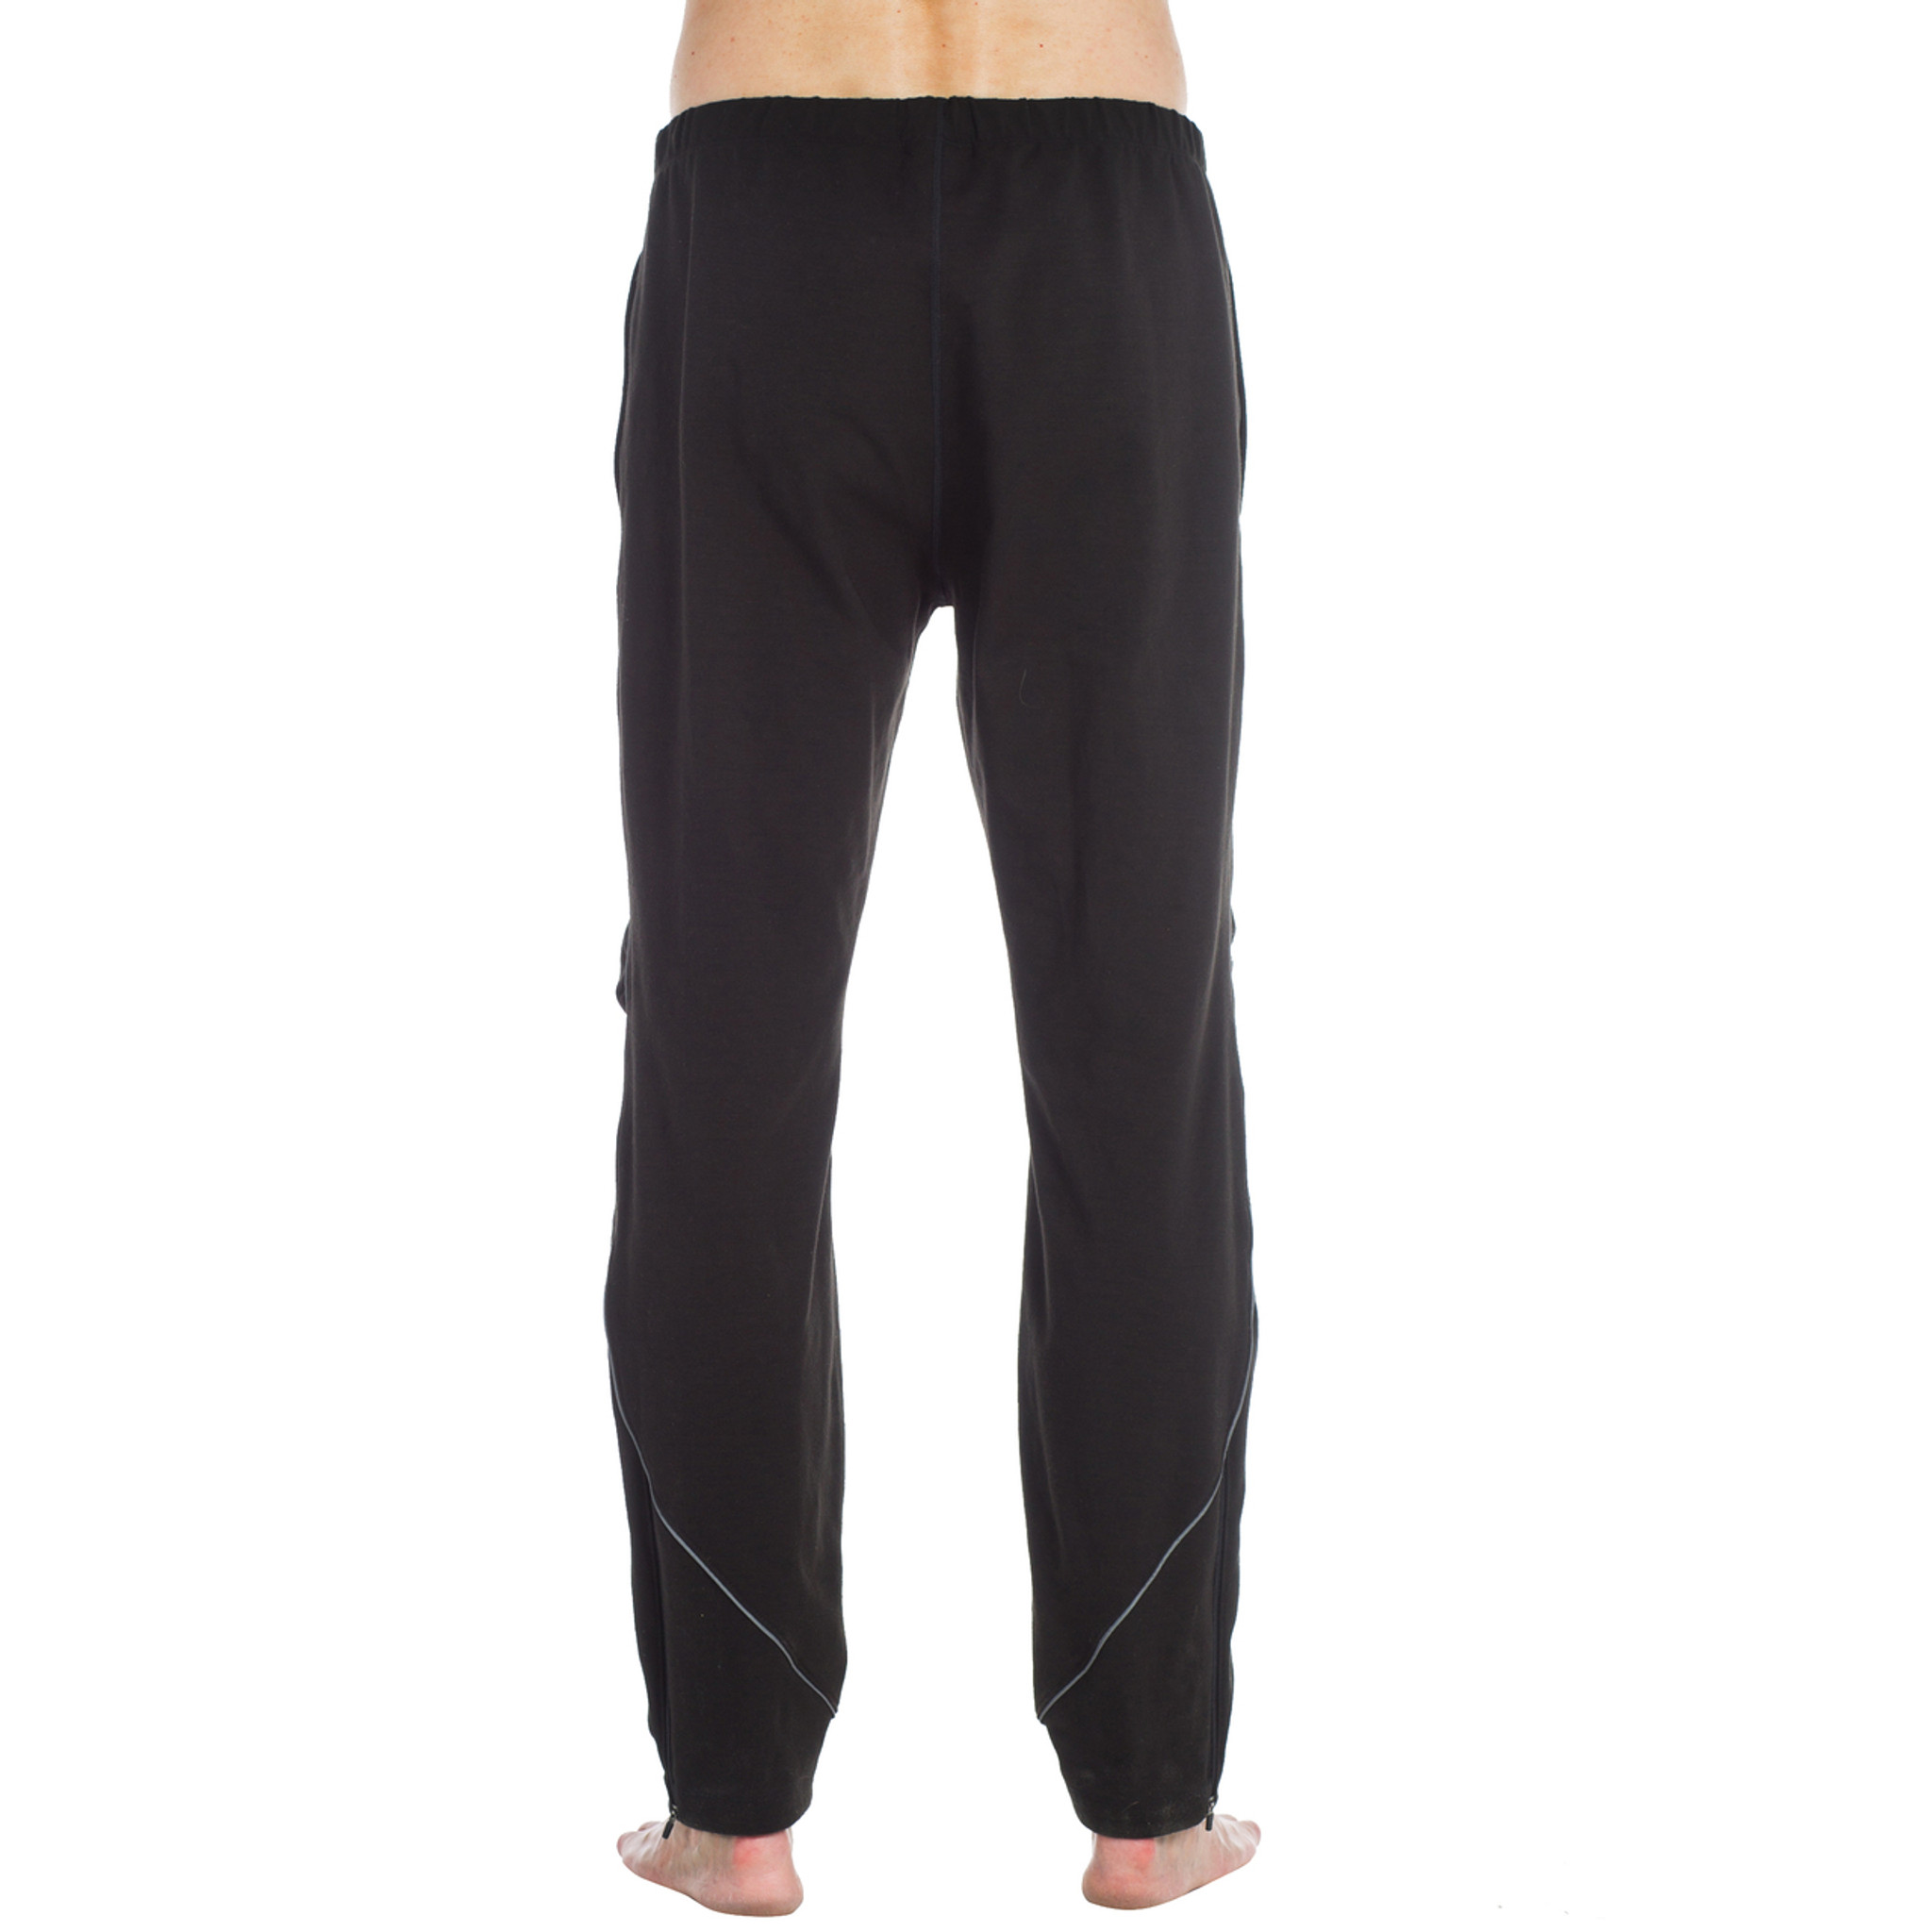 Under Armour Men's Stretch Woven Cold Weather Joggers